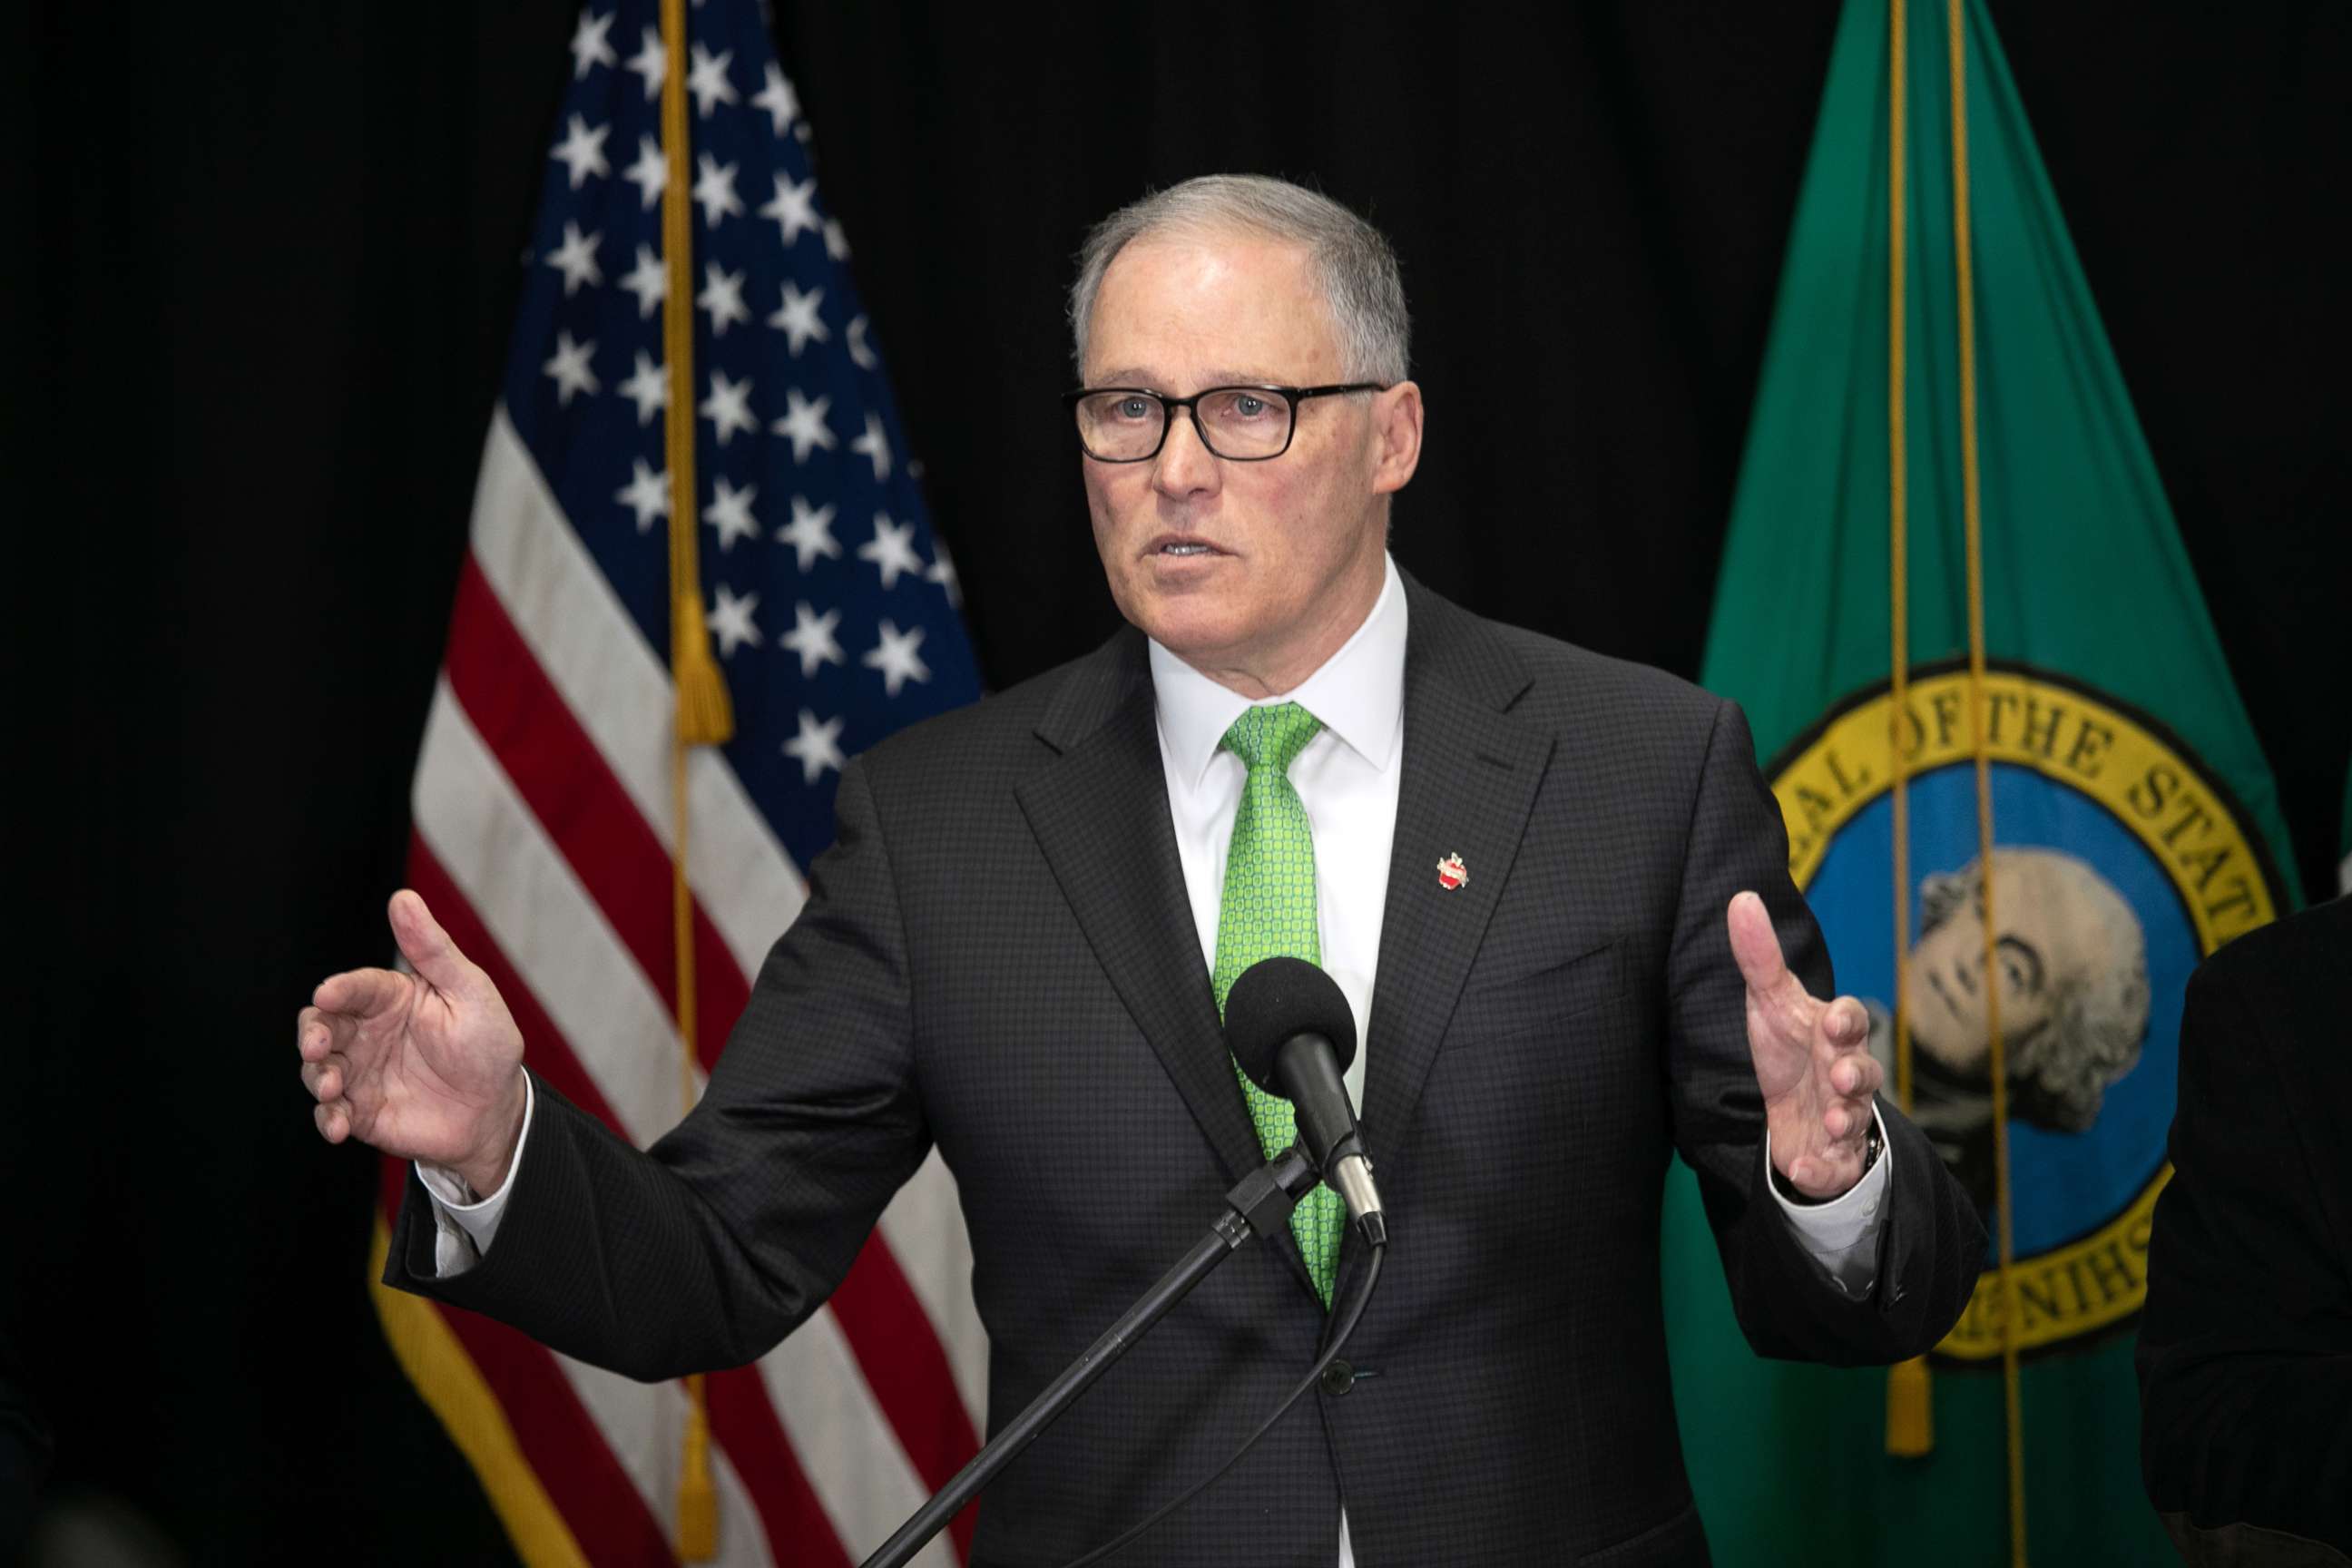 PHOTO: In this March 11, 2020, file photo, Washington State Governor Jay Inslee announces measures to help contain the spread of coronavirus at a press conference in Seattle.